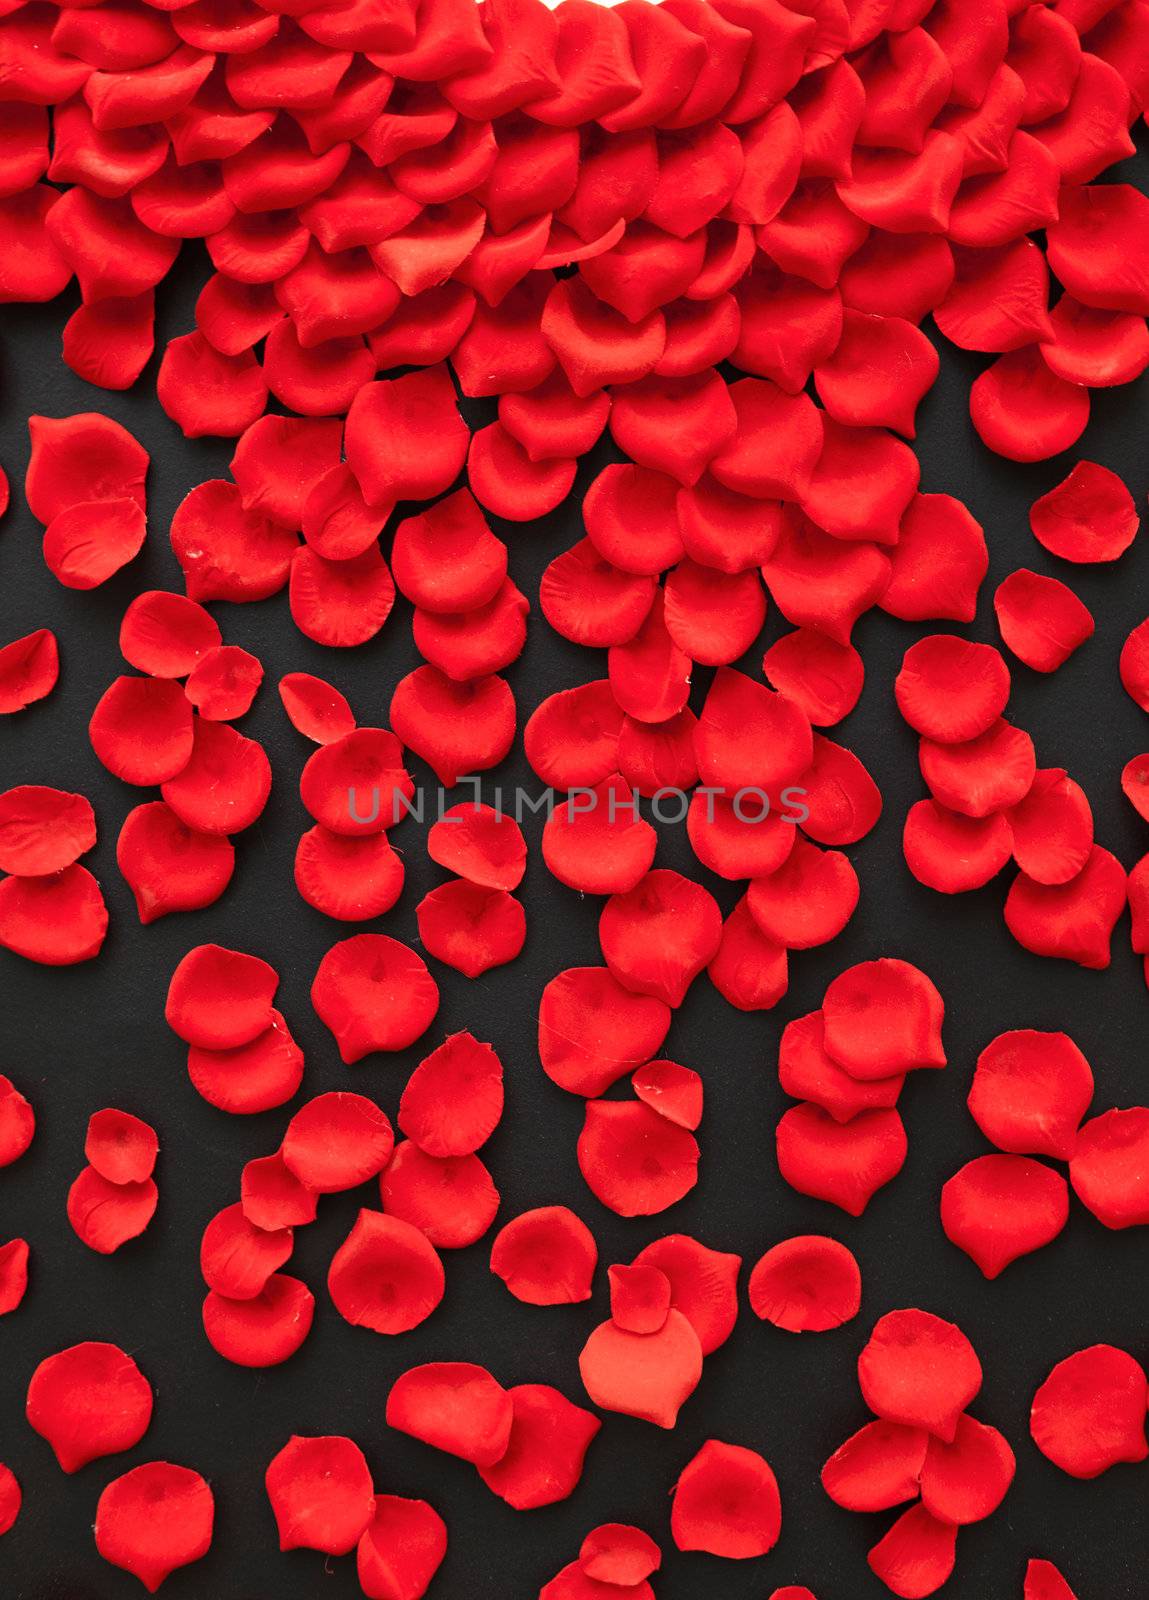 A few red rose petals isolated on black